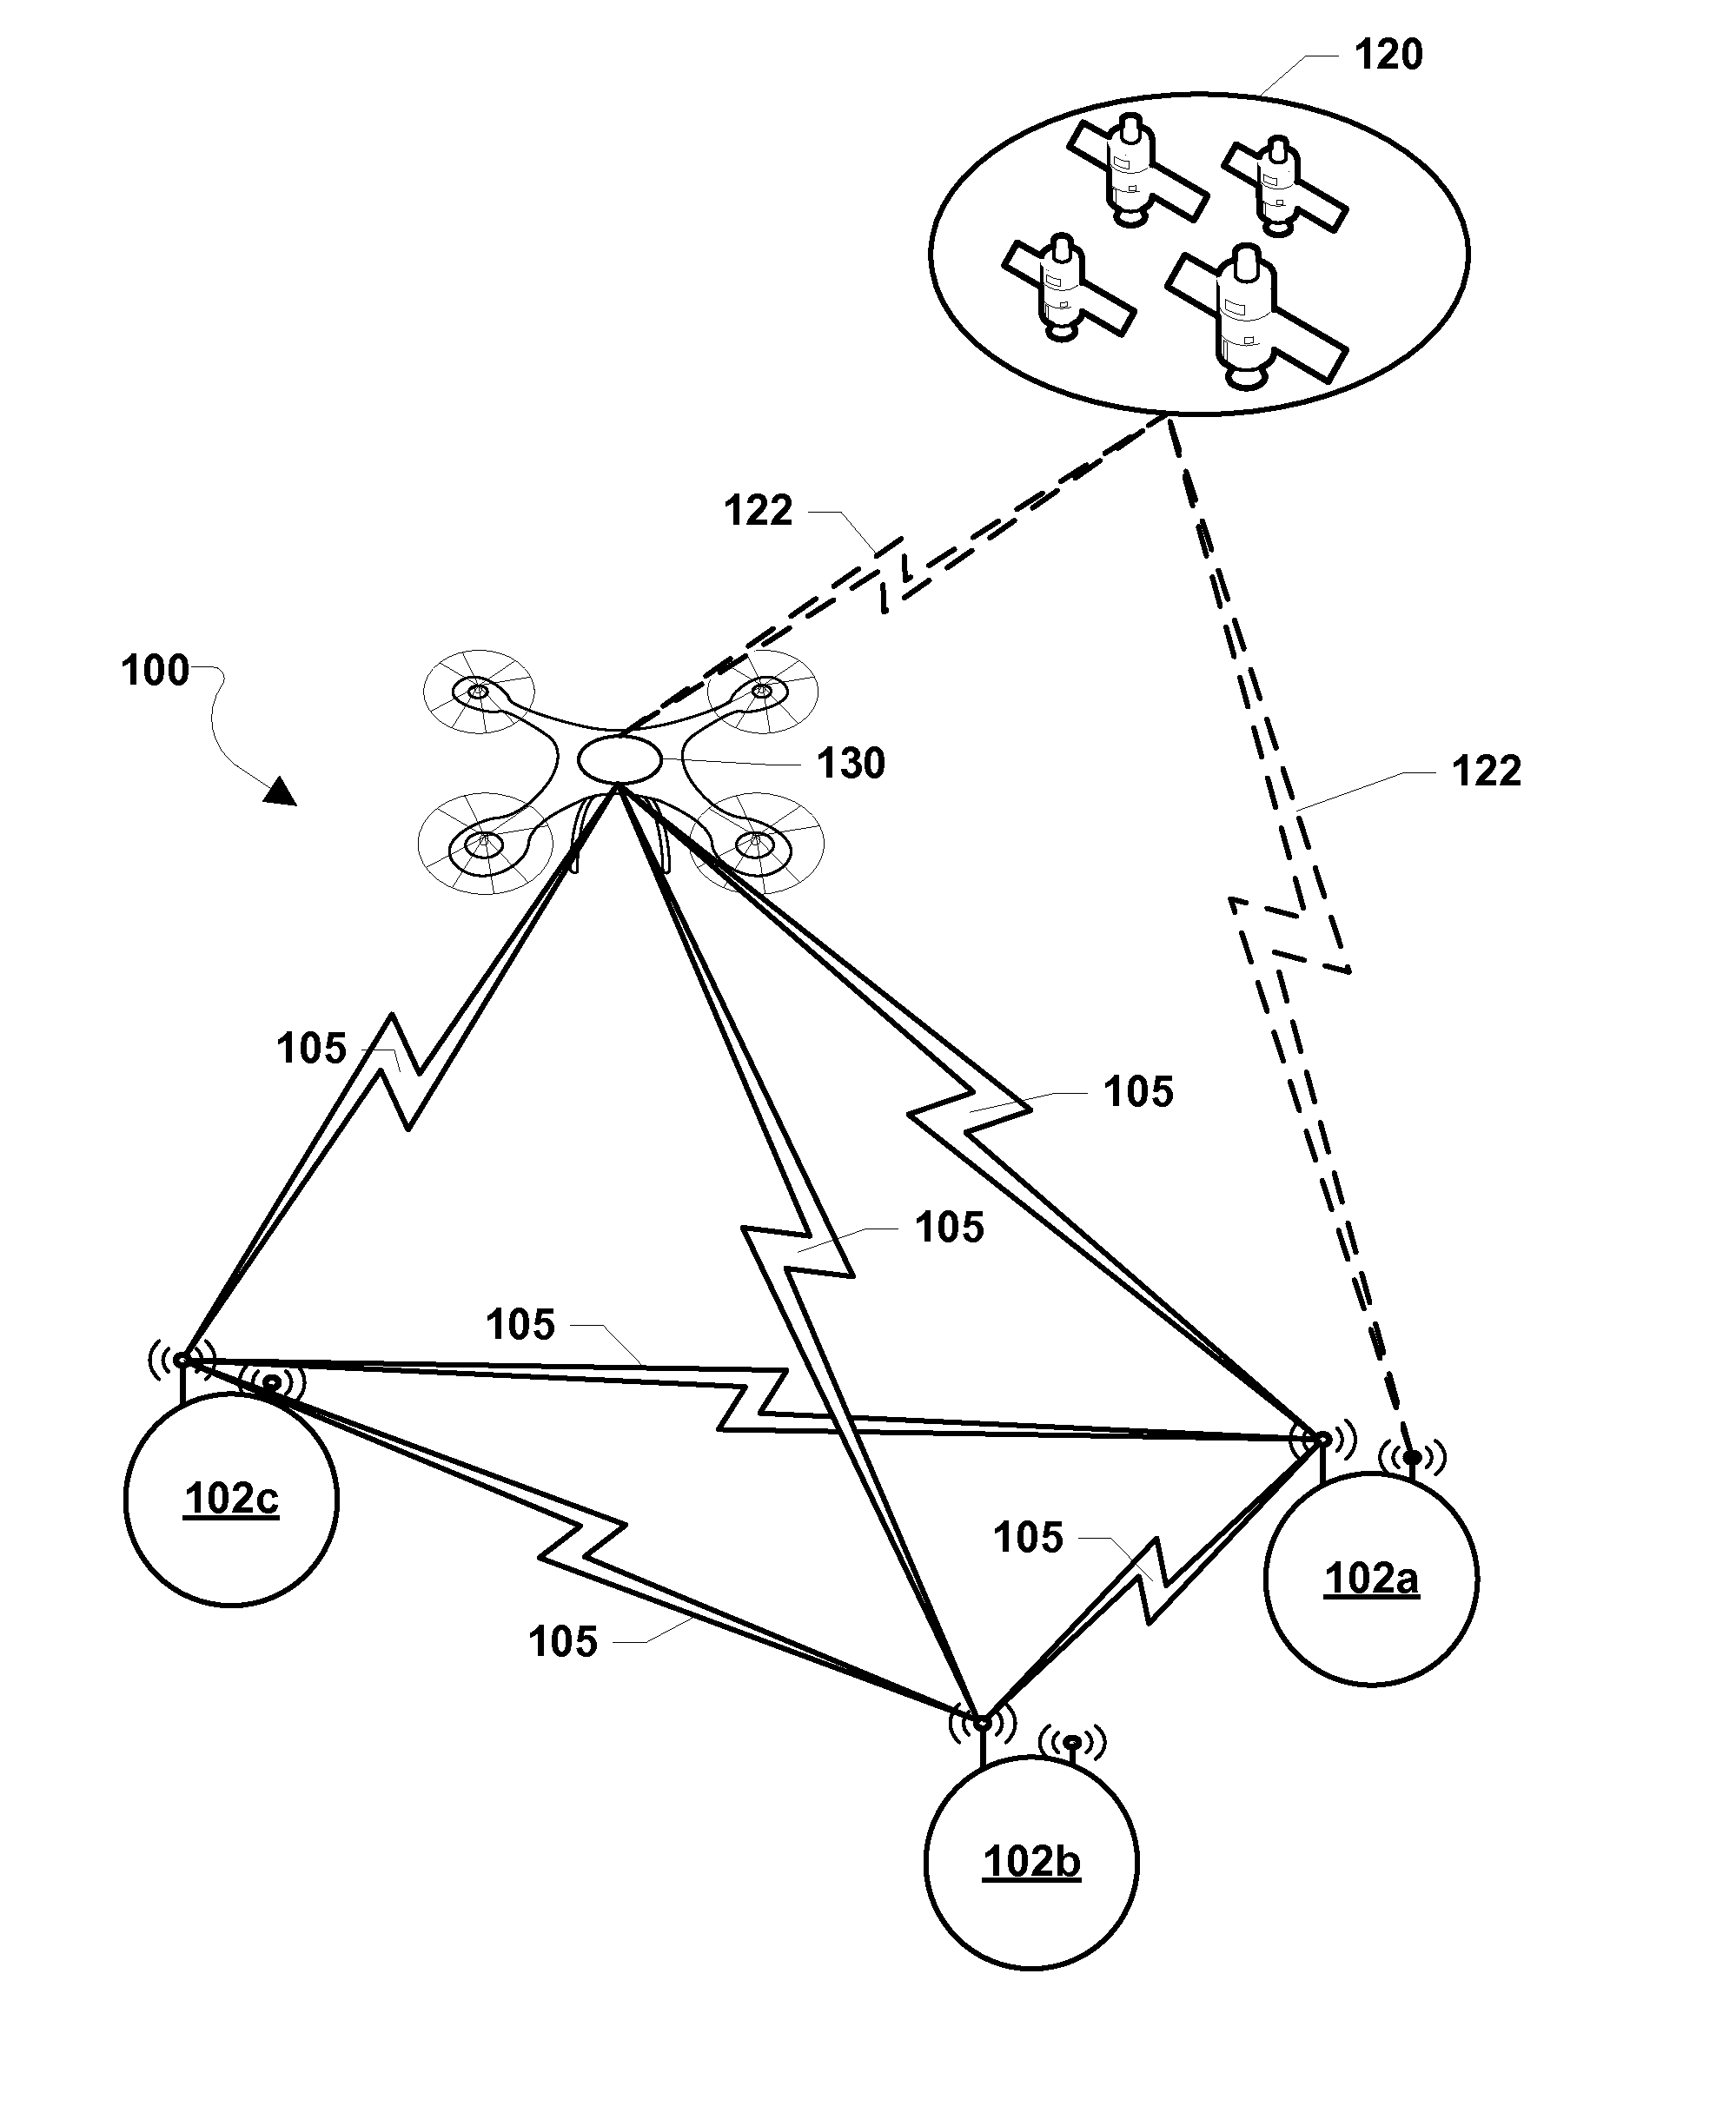 Ground-based location systems and methods